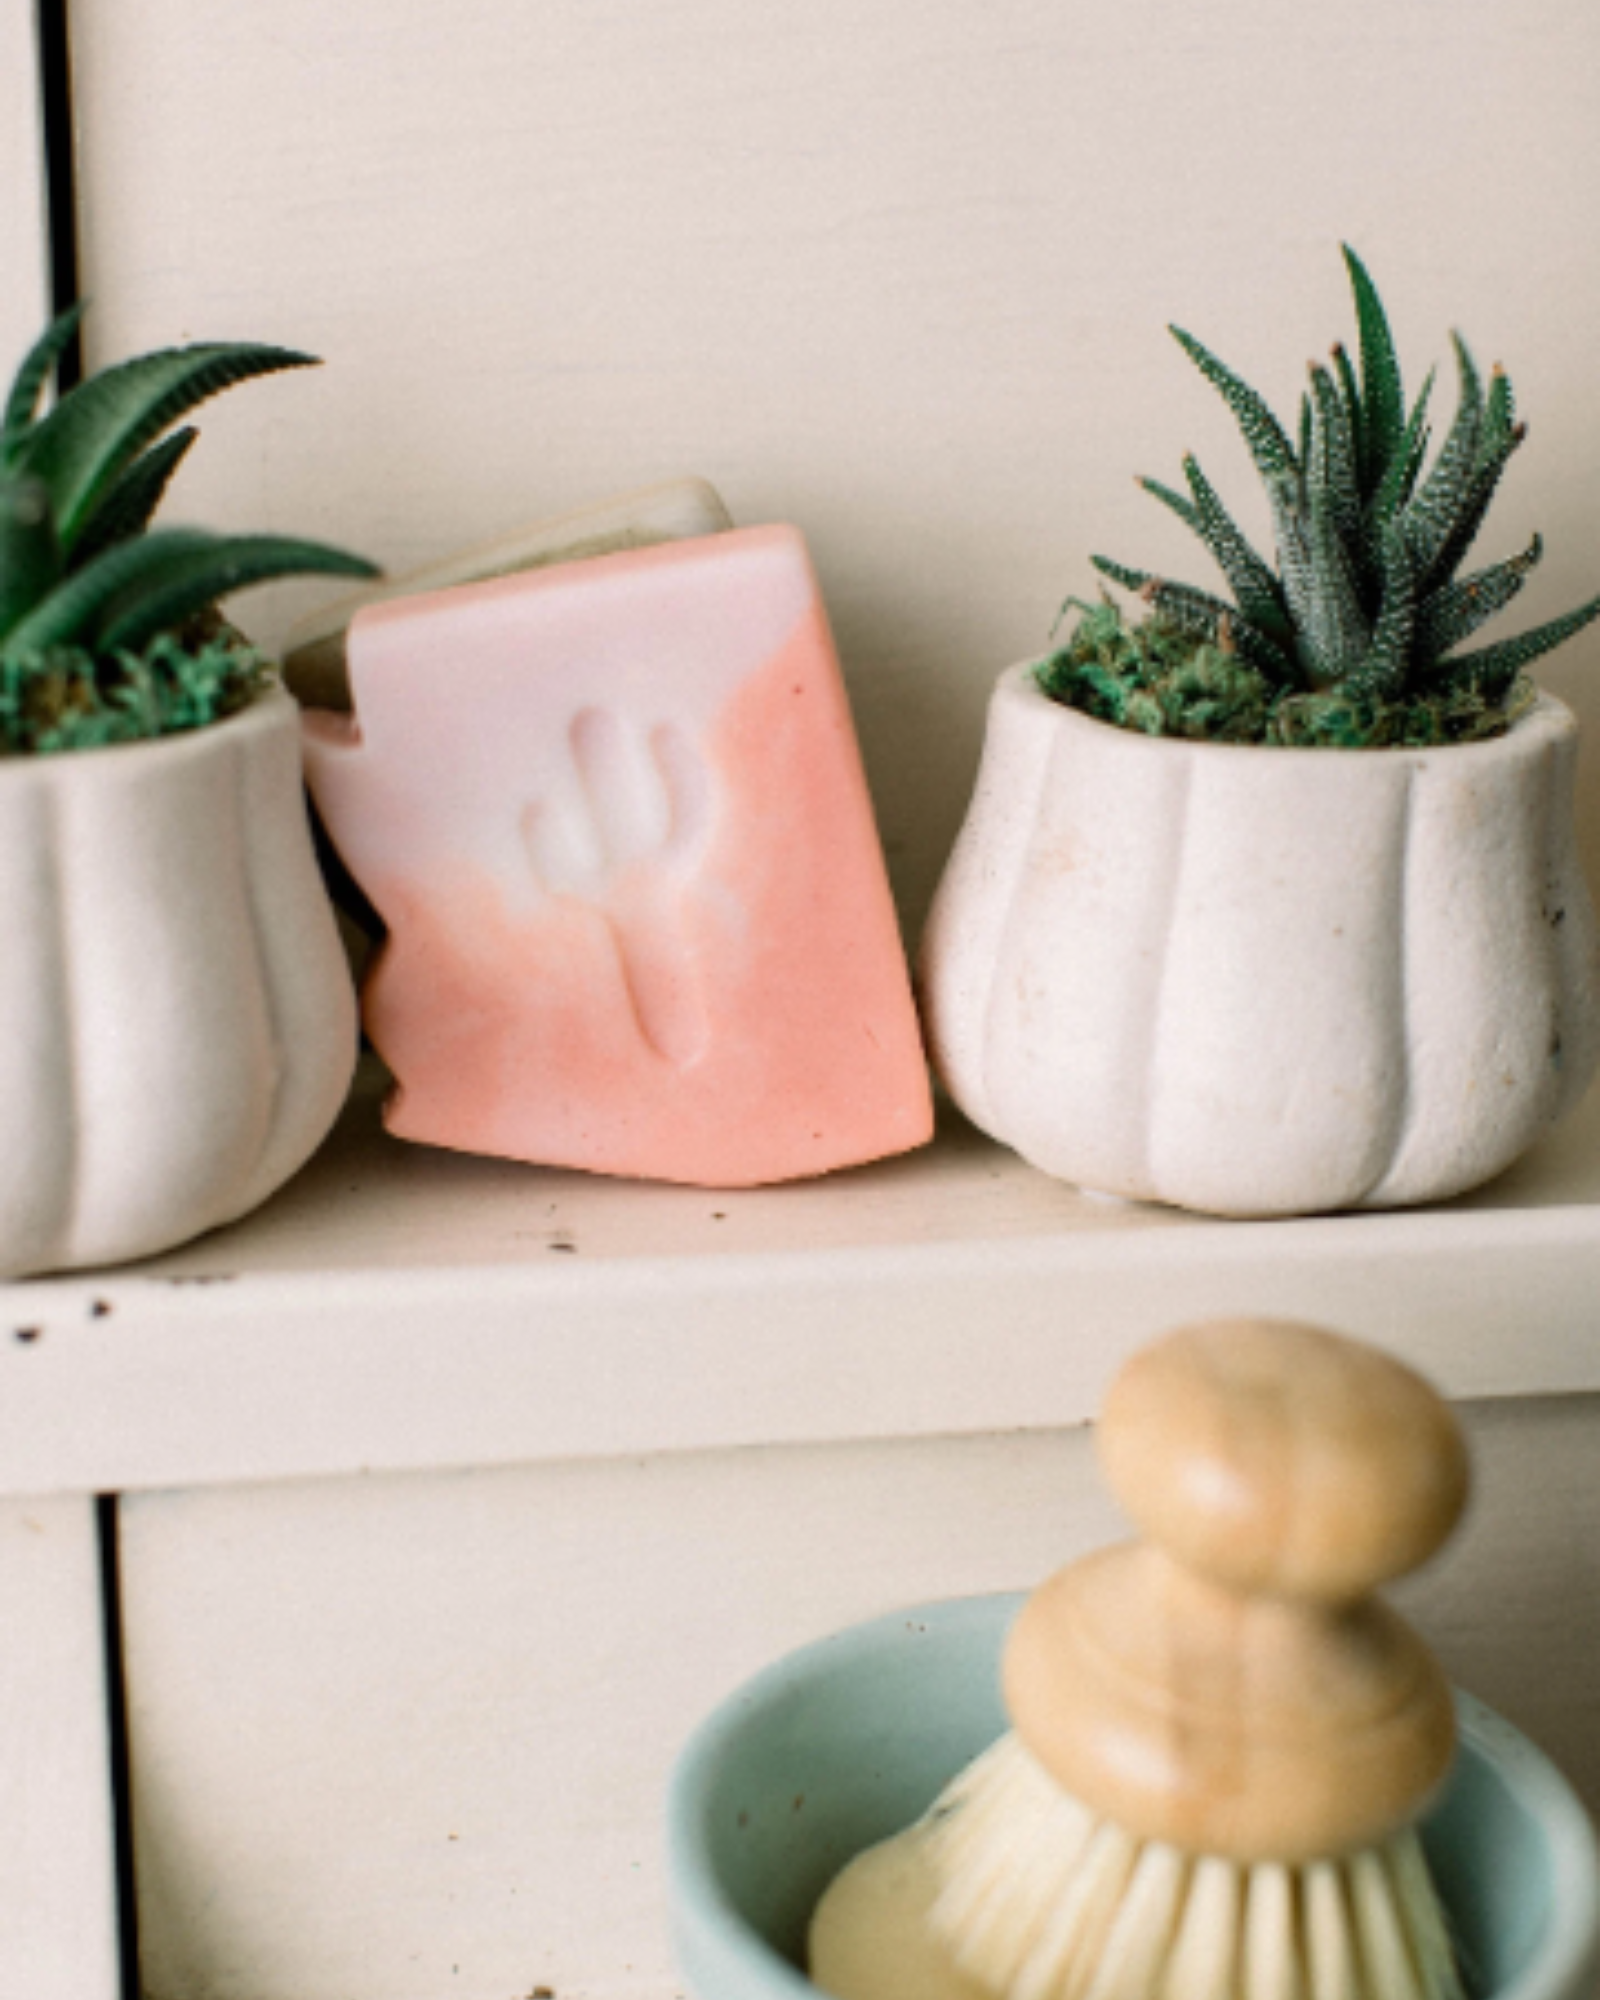 Pink and white swirled arizona shaped soap on a shelf next to green succulents in white pots